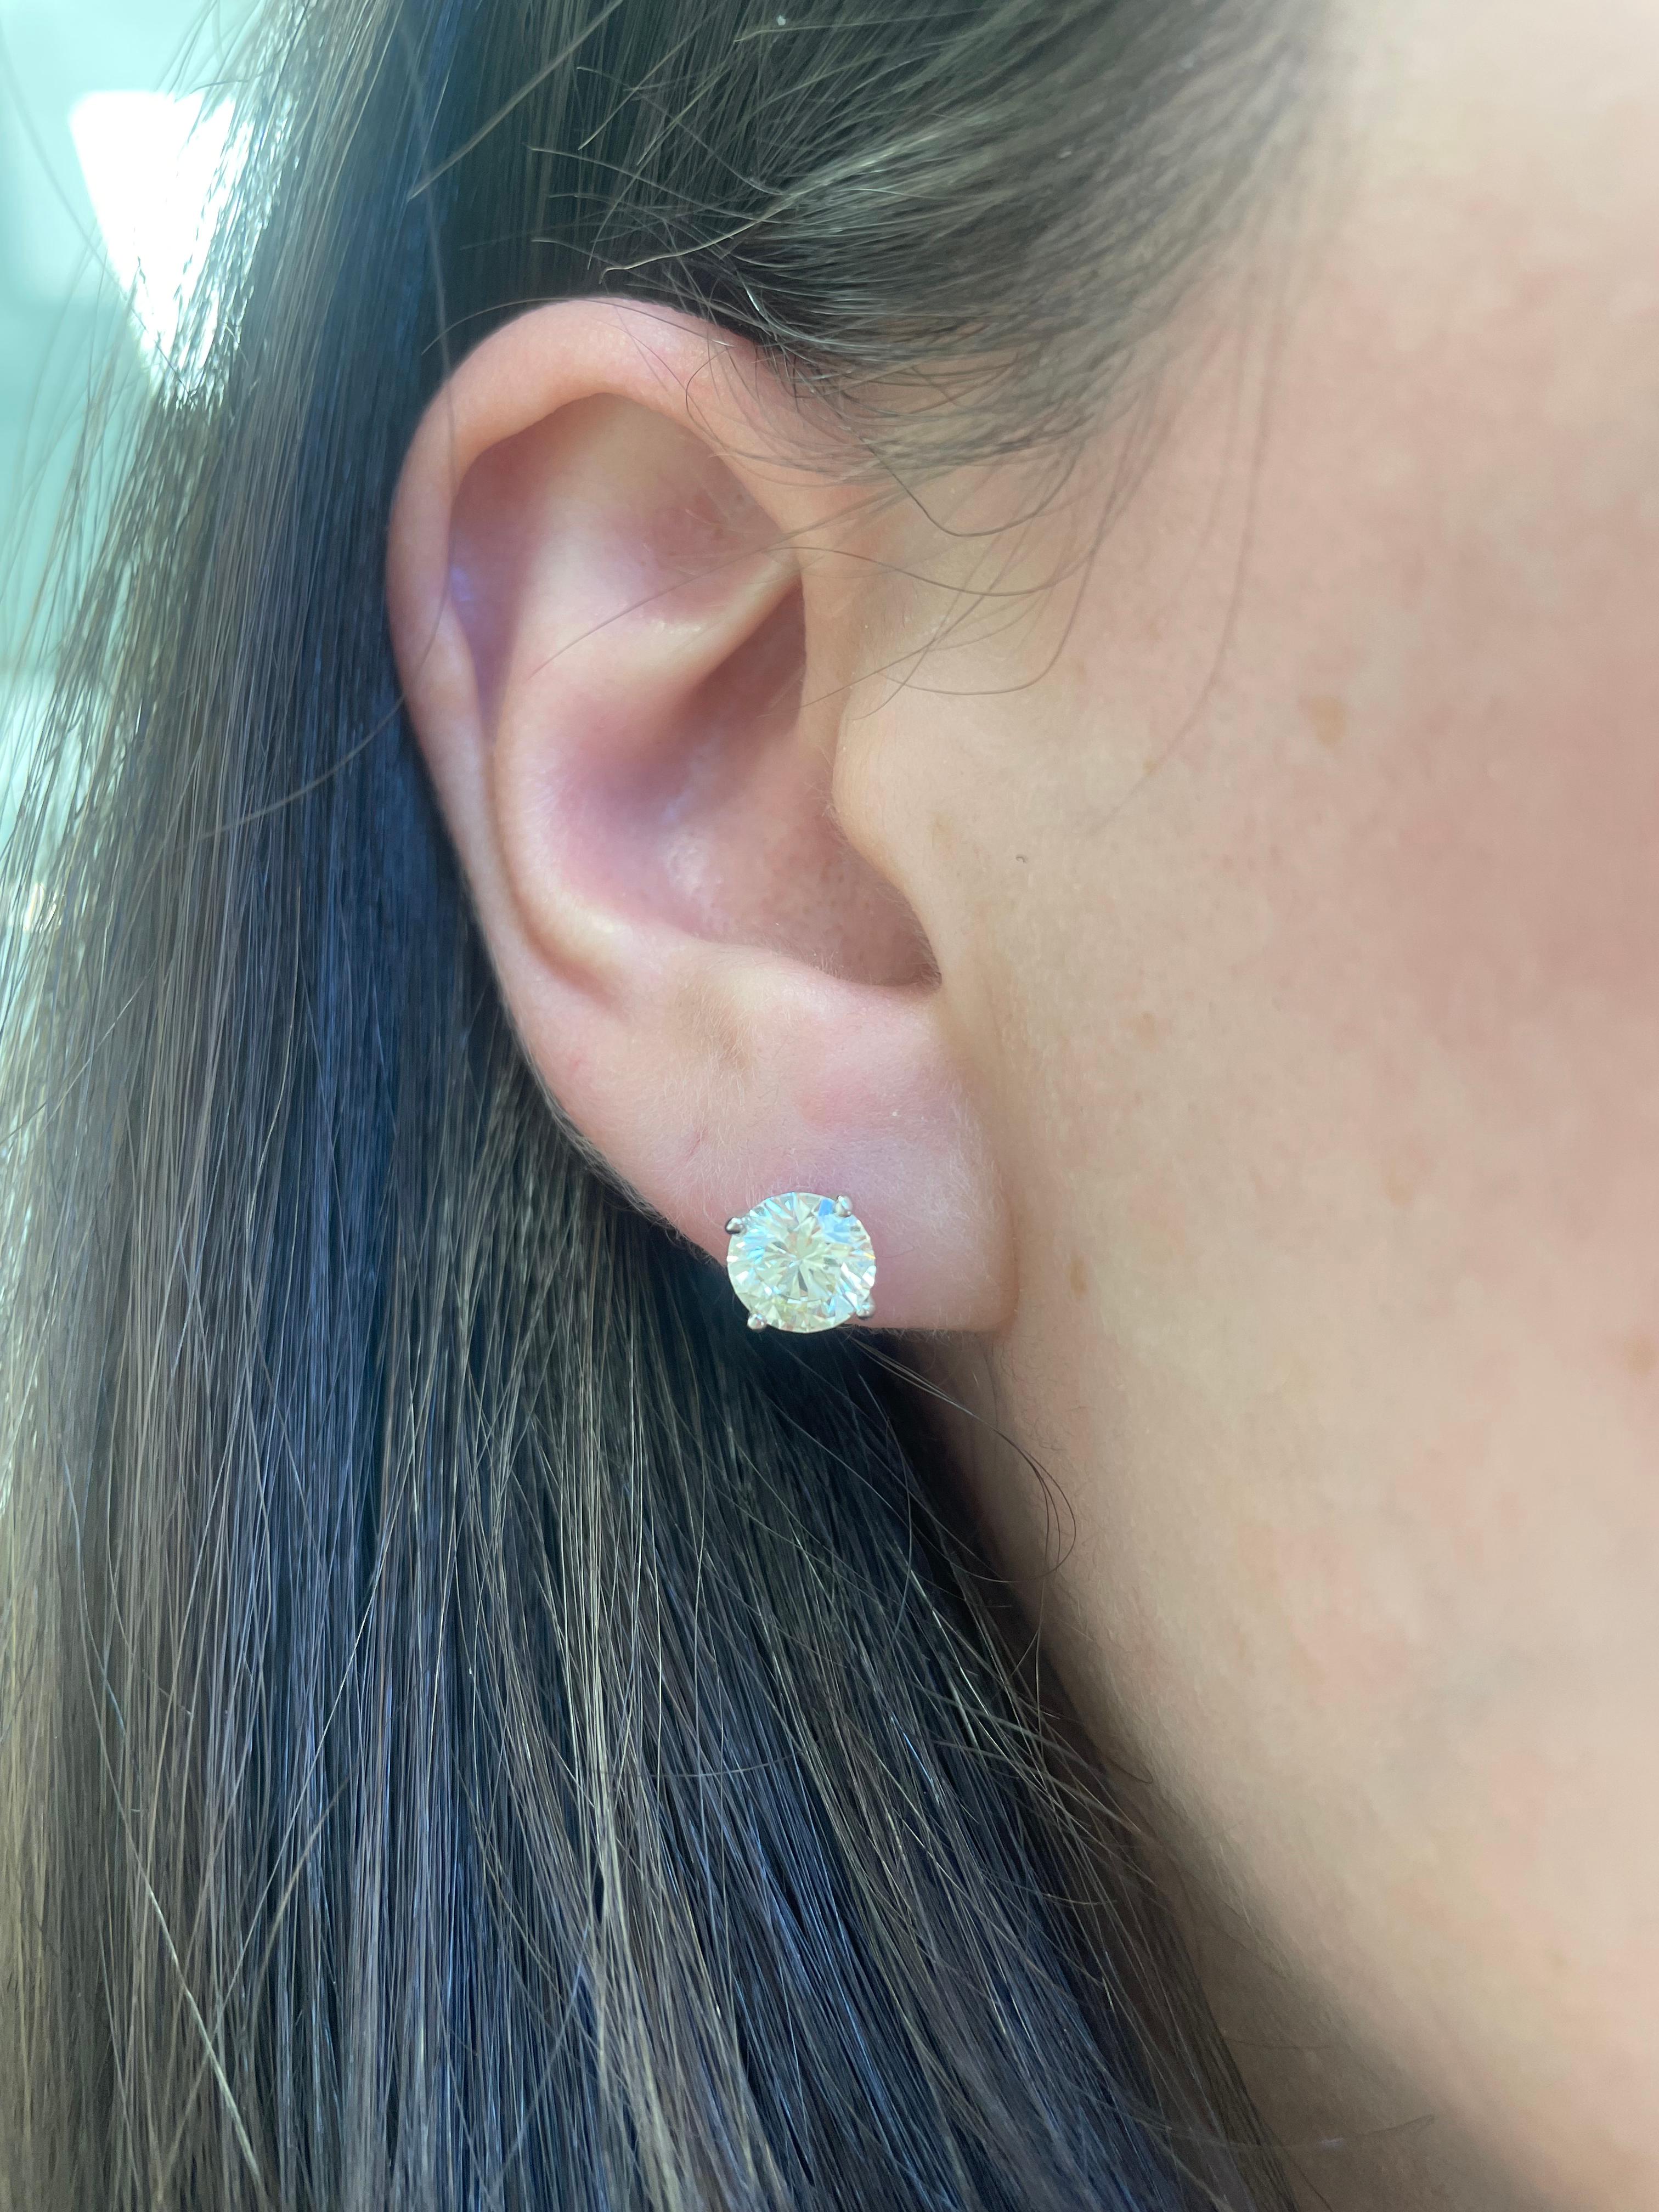 Classic diamond stud earrings, each stone EGL certified, by Alexander Beverly Hills.
Two matching round brilliant diamonds 1.44 carats total. Both stones L color grad and VVS2 clarity grade. 14k white gold.
Accommodated with an up to date appraisal